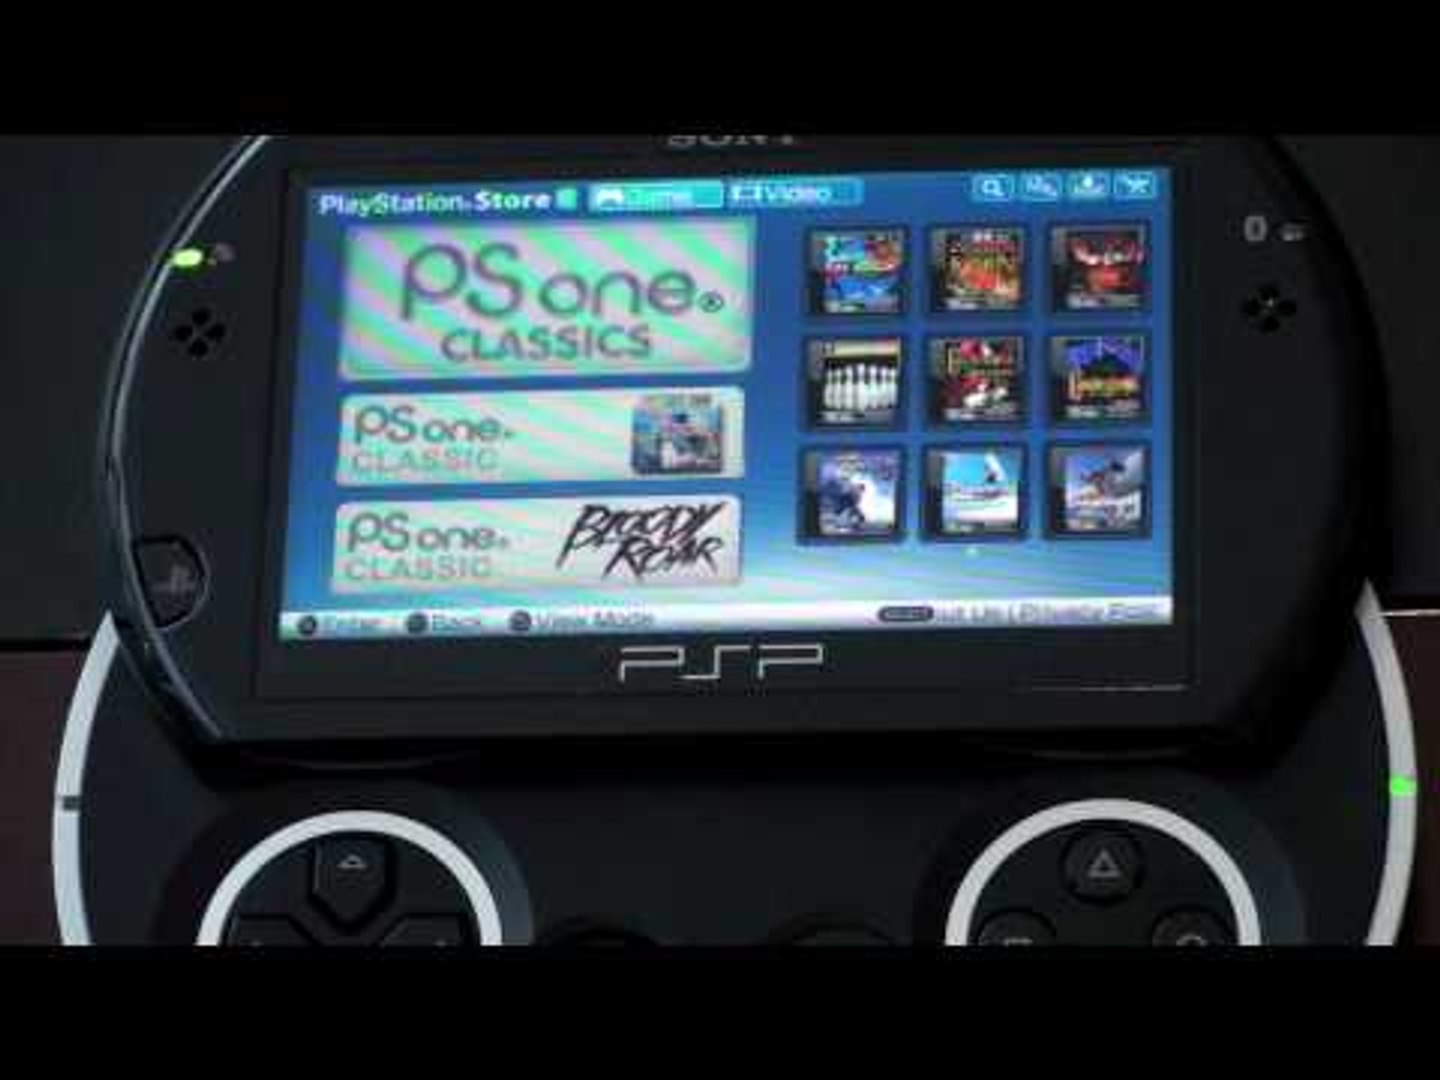 PlayStation Store for the PSP Go (Wireless Downloads) - video Dailymotion